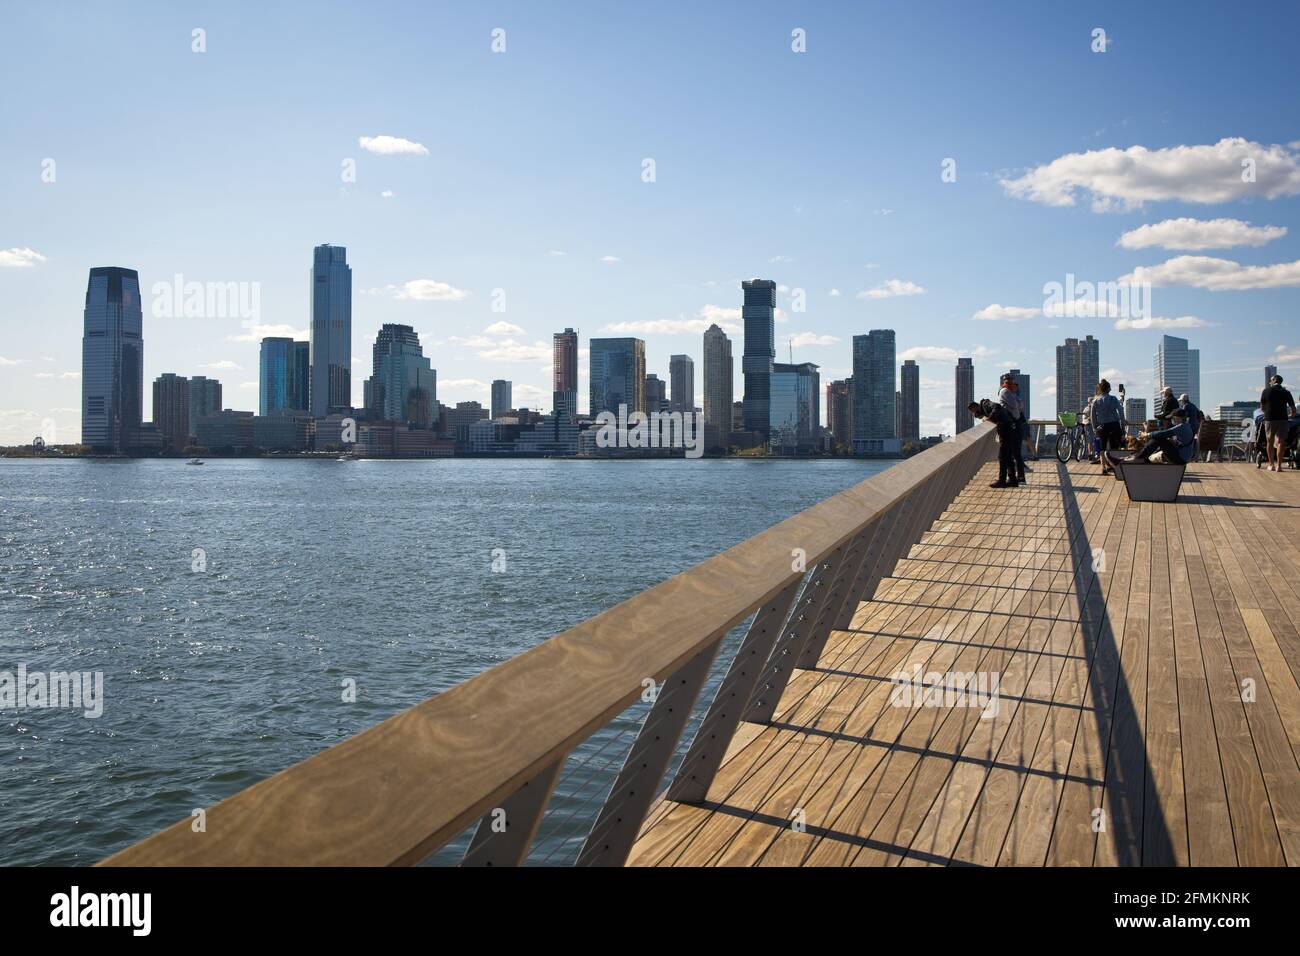 New York, NY, USA - May 10, 2021: Jersey City as viewed from Pier 26 in lower Manhattan Stock Photo